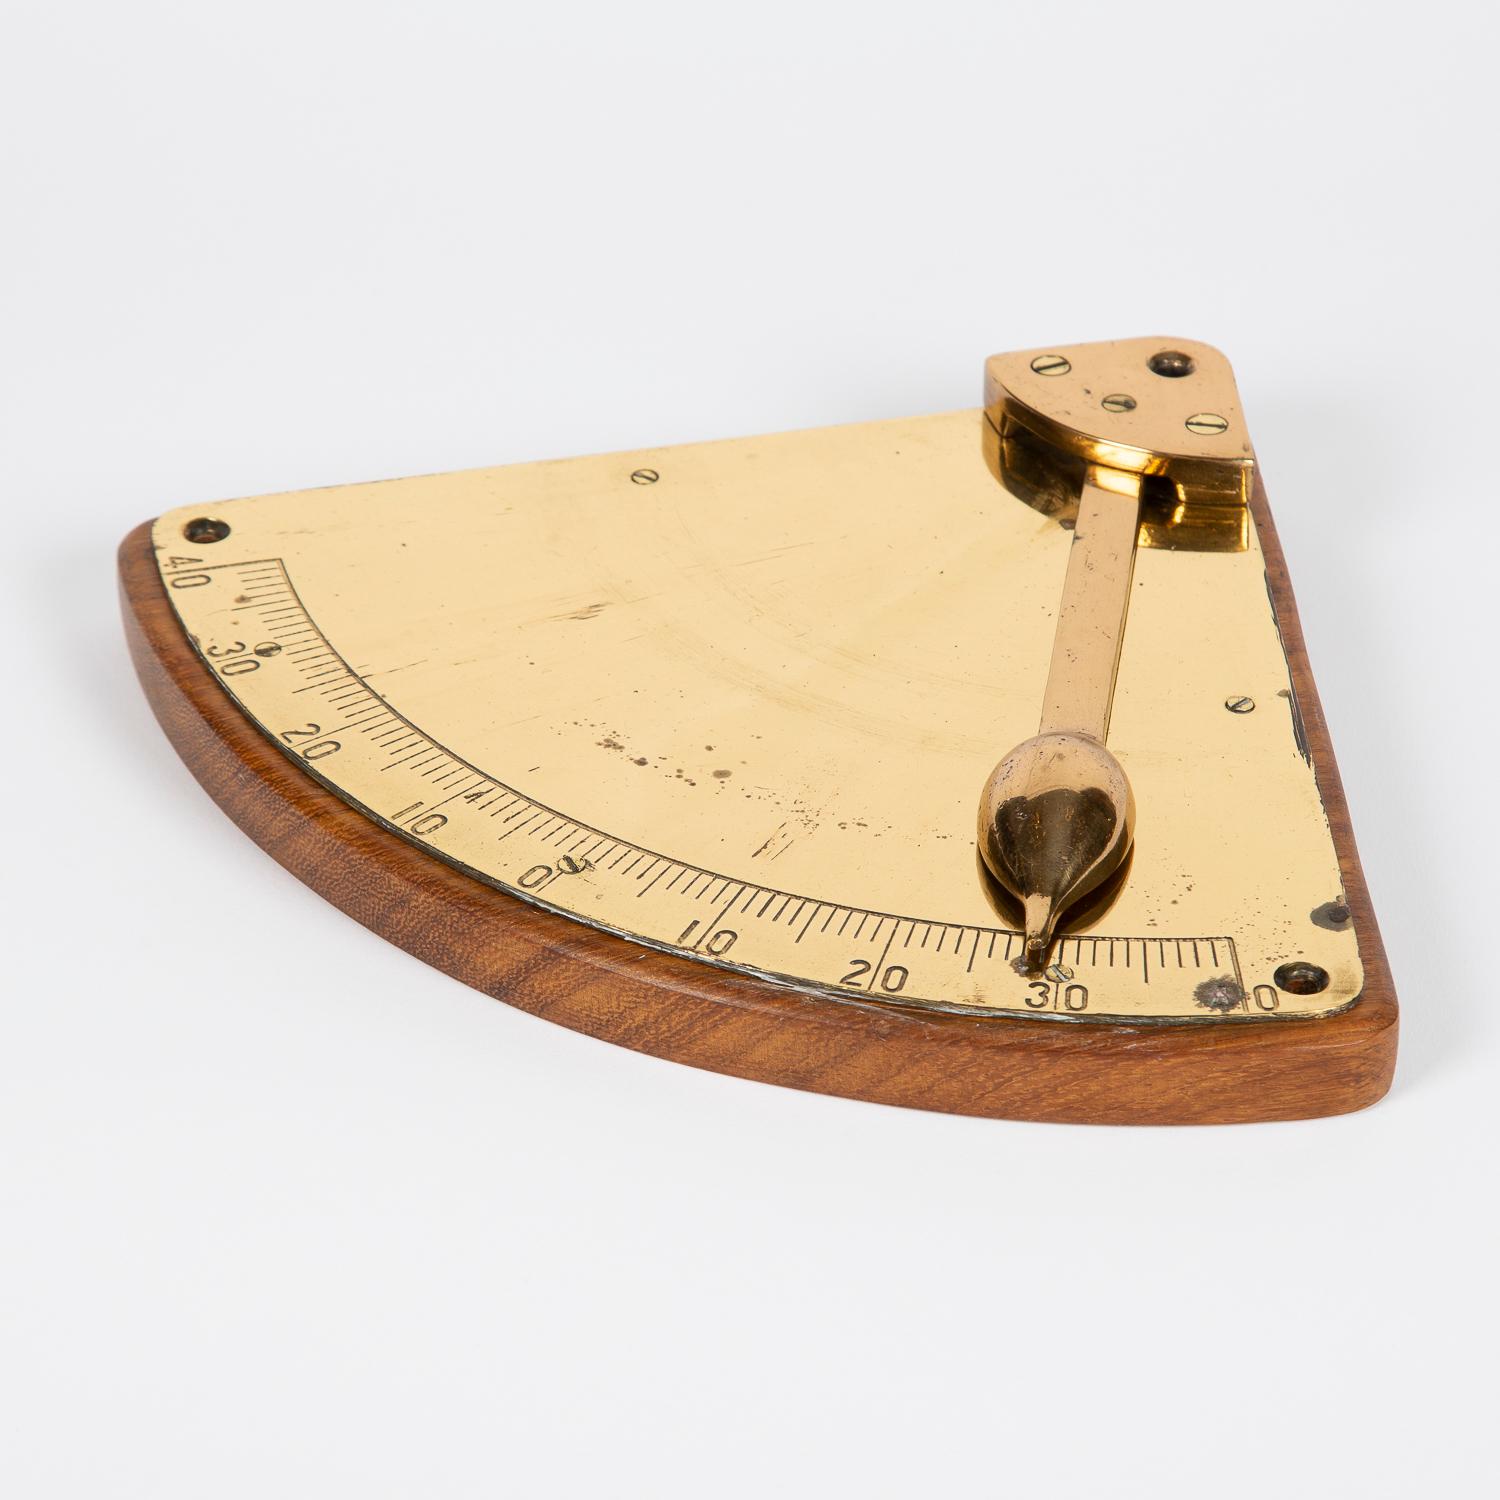 A brass ship's inclinometer, circa 1910.

Scale in degrees from the vertical to 40° of tilt/list.

An inclinometer, or clinometer, is an instrument used for measuring angles of slope (or tilt) or elevation of an object with respect to gravity's